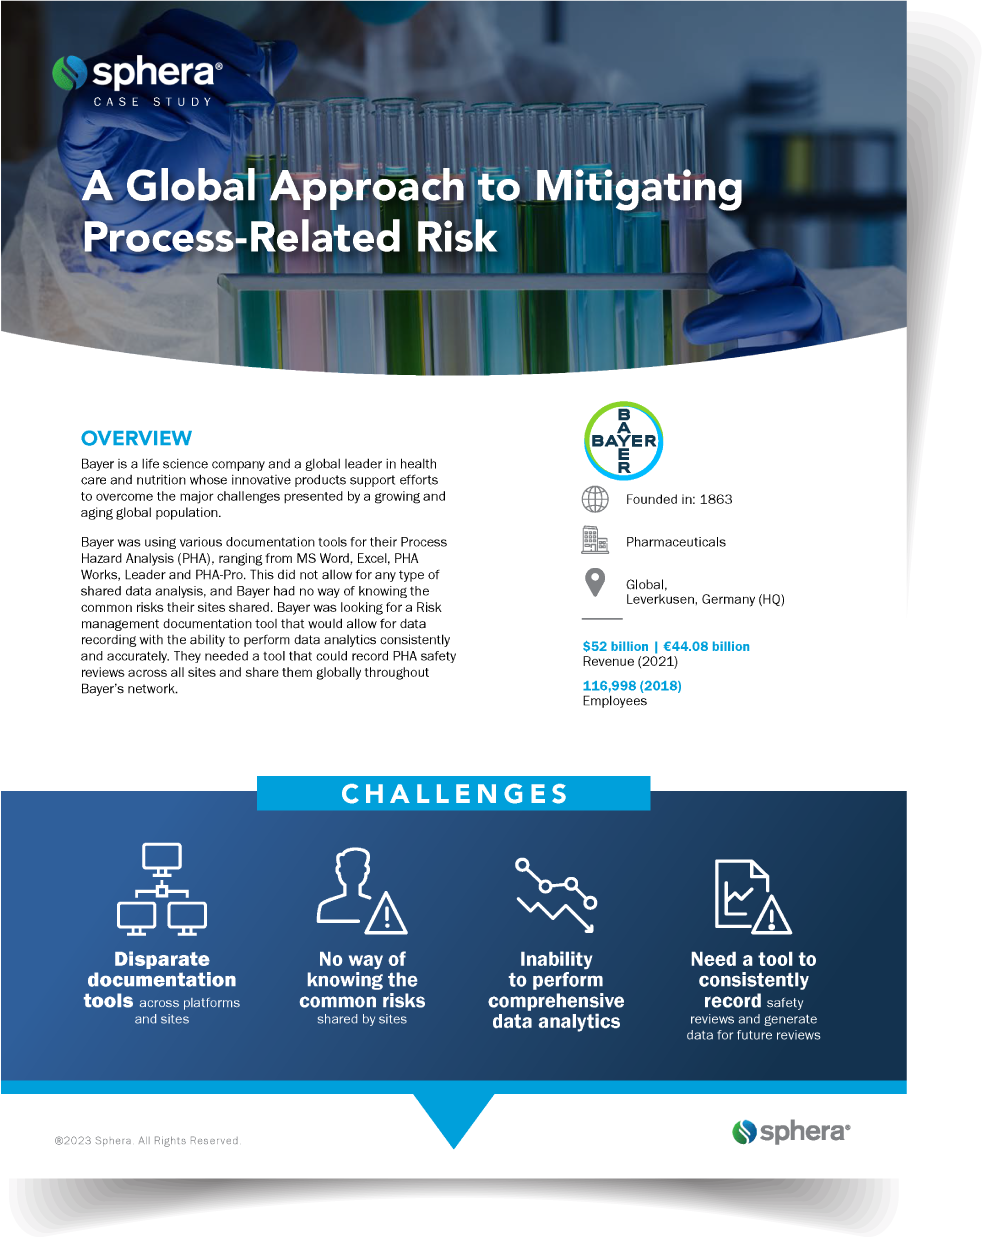 A Global Approach to Mitigating Process-Related Risk